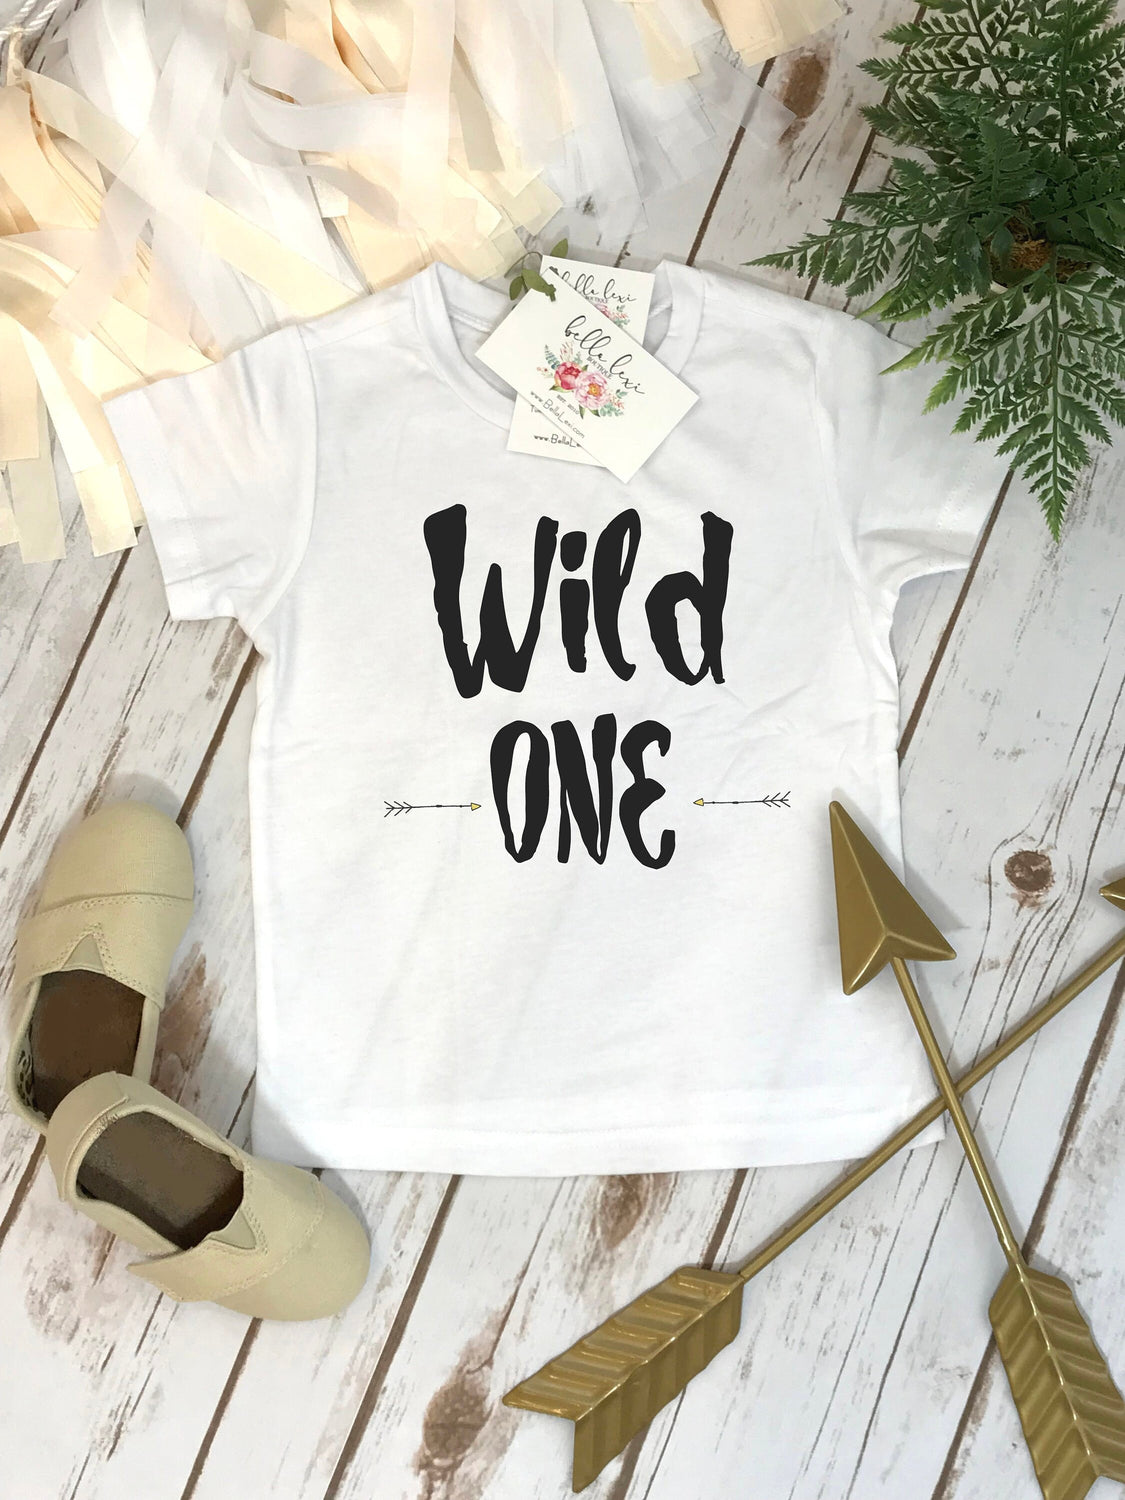 Wild ONE birthday, First Birthday Outfit, 1st Birthday shirt, Wild One Party, Wild One shirt, Wild One Theme, Wild one Birthday,Boy Birthday